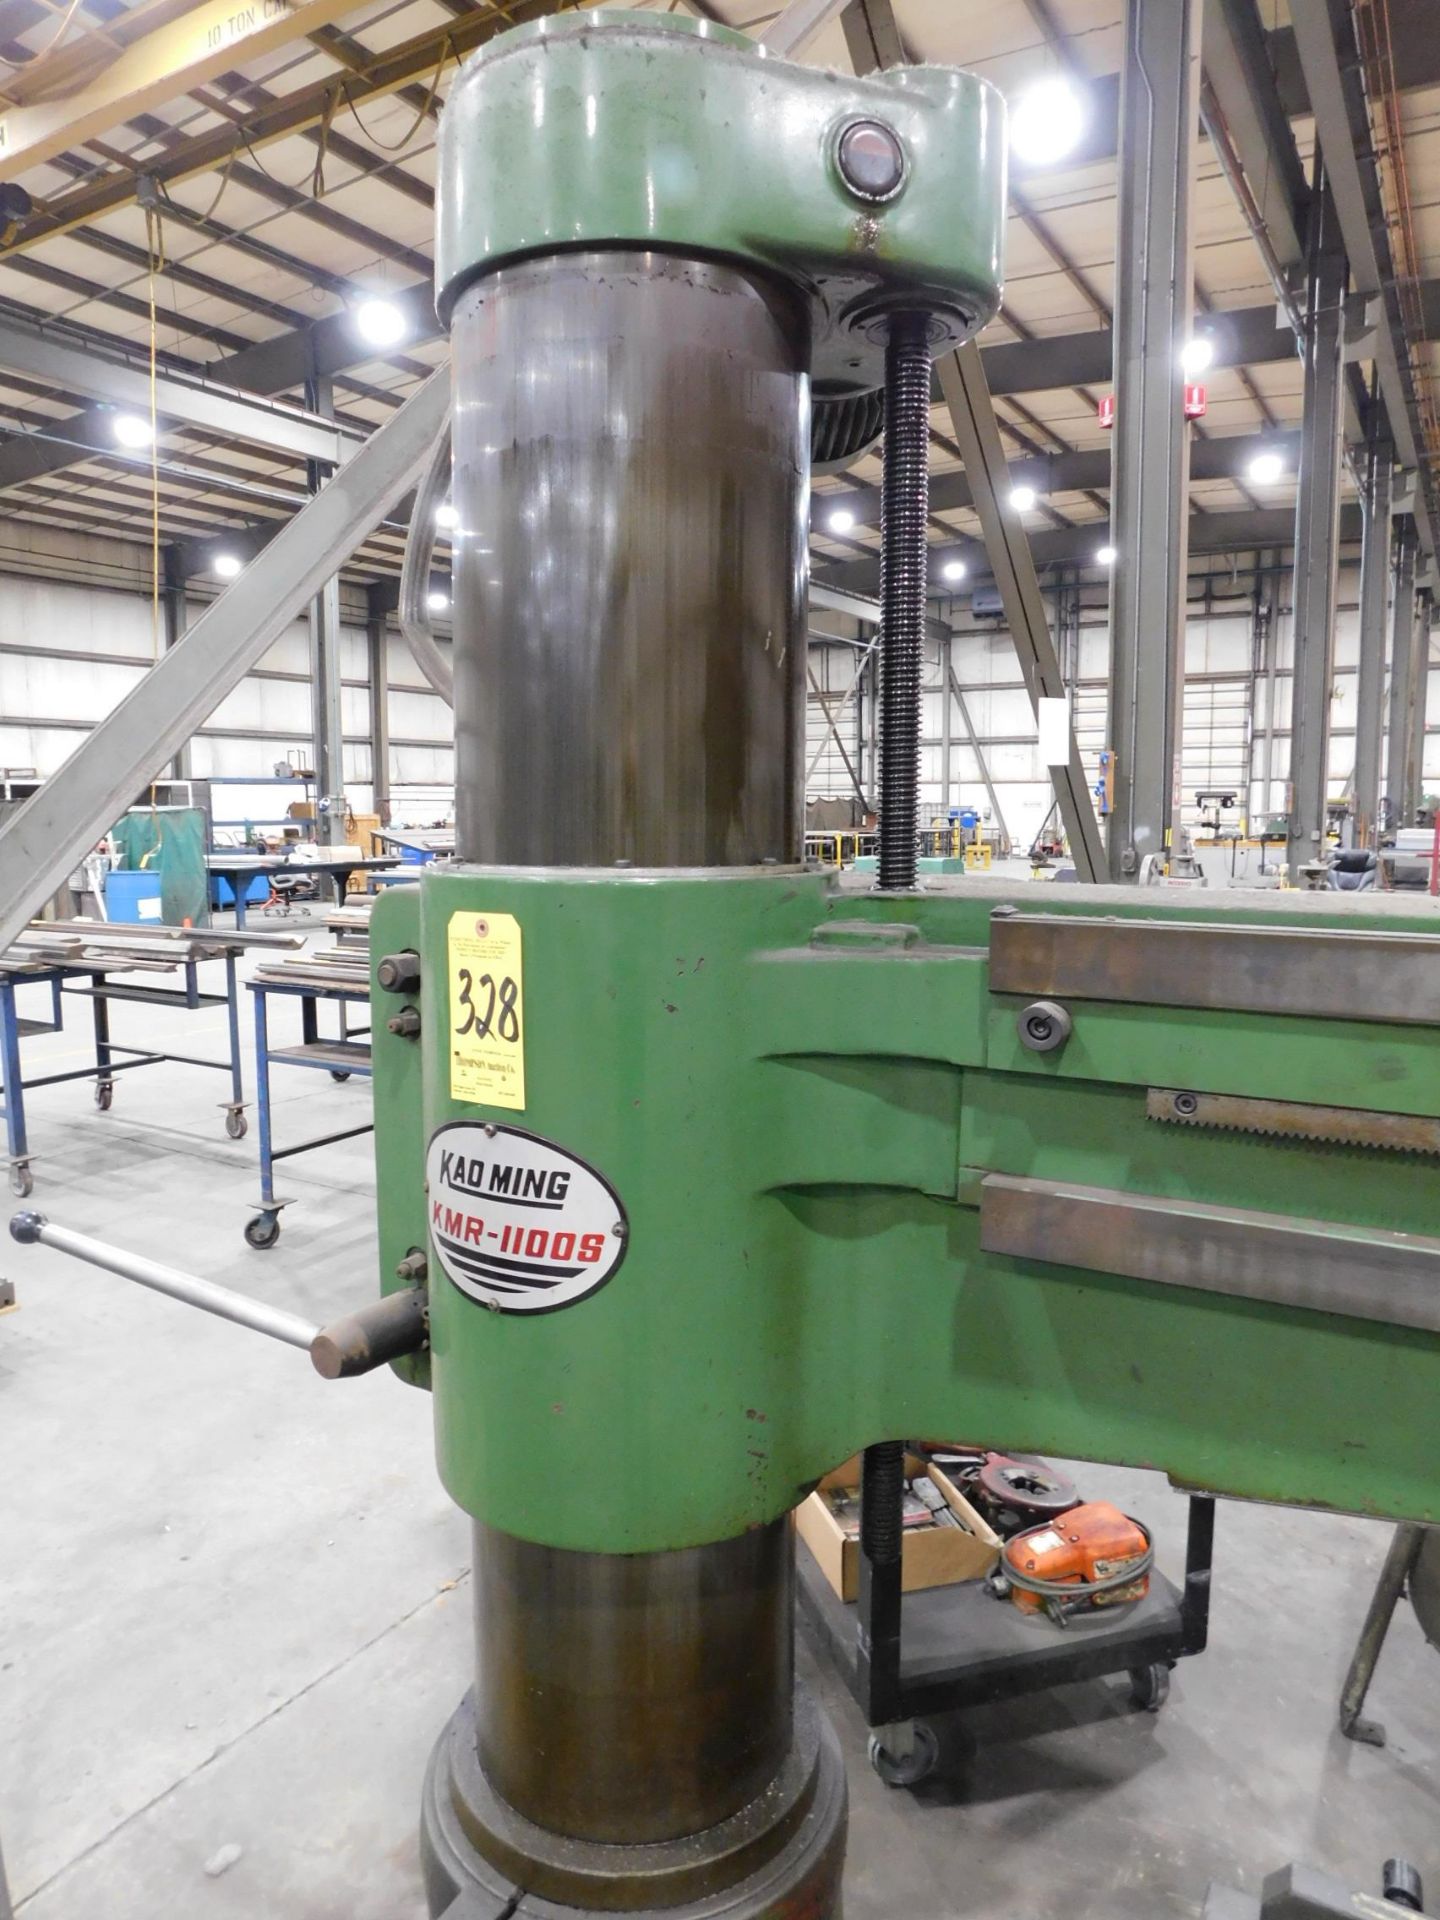 Kao Ming Model KMR-1100S Radial Arm Drill, s/n 1105, Box Table, 4' Arm, 11.8" Column - Image 4 of 8